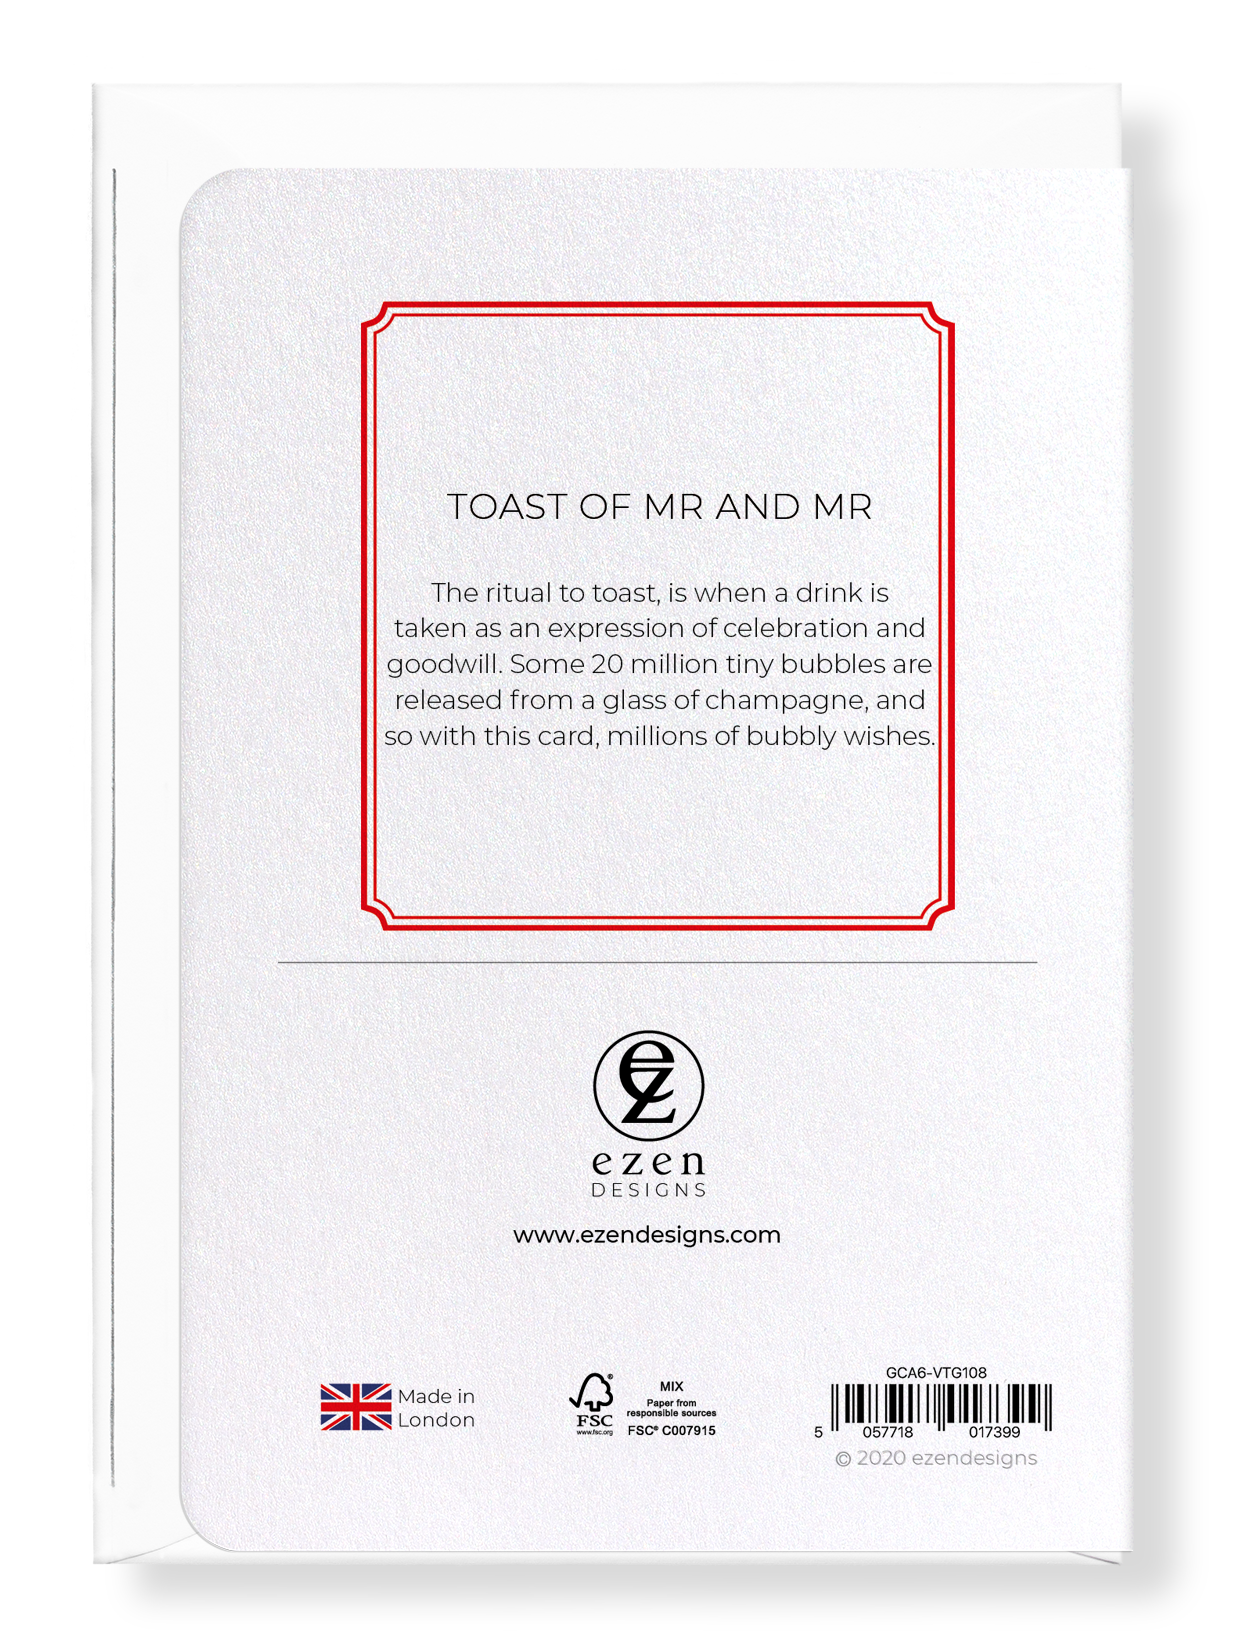 Ezen Designs - Toast of mr and mr - Greeting Card - Back